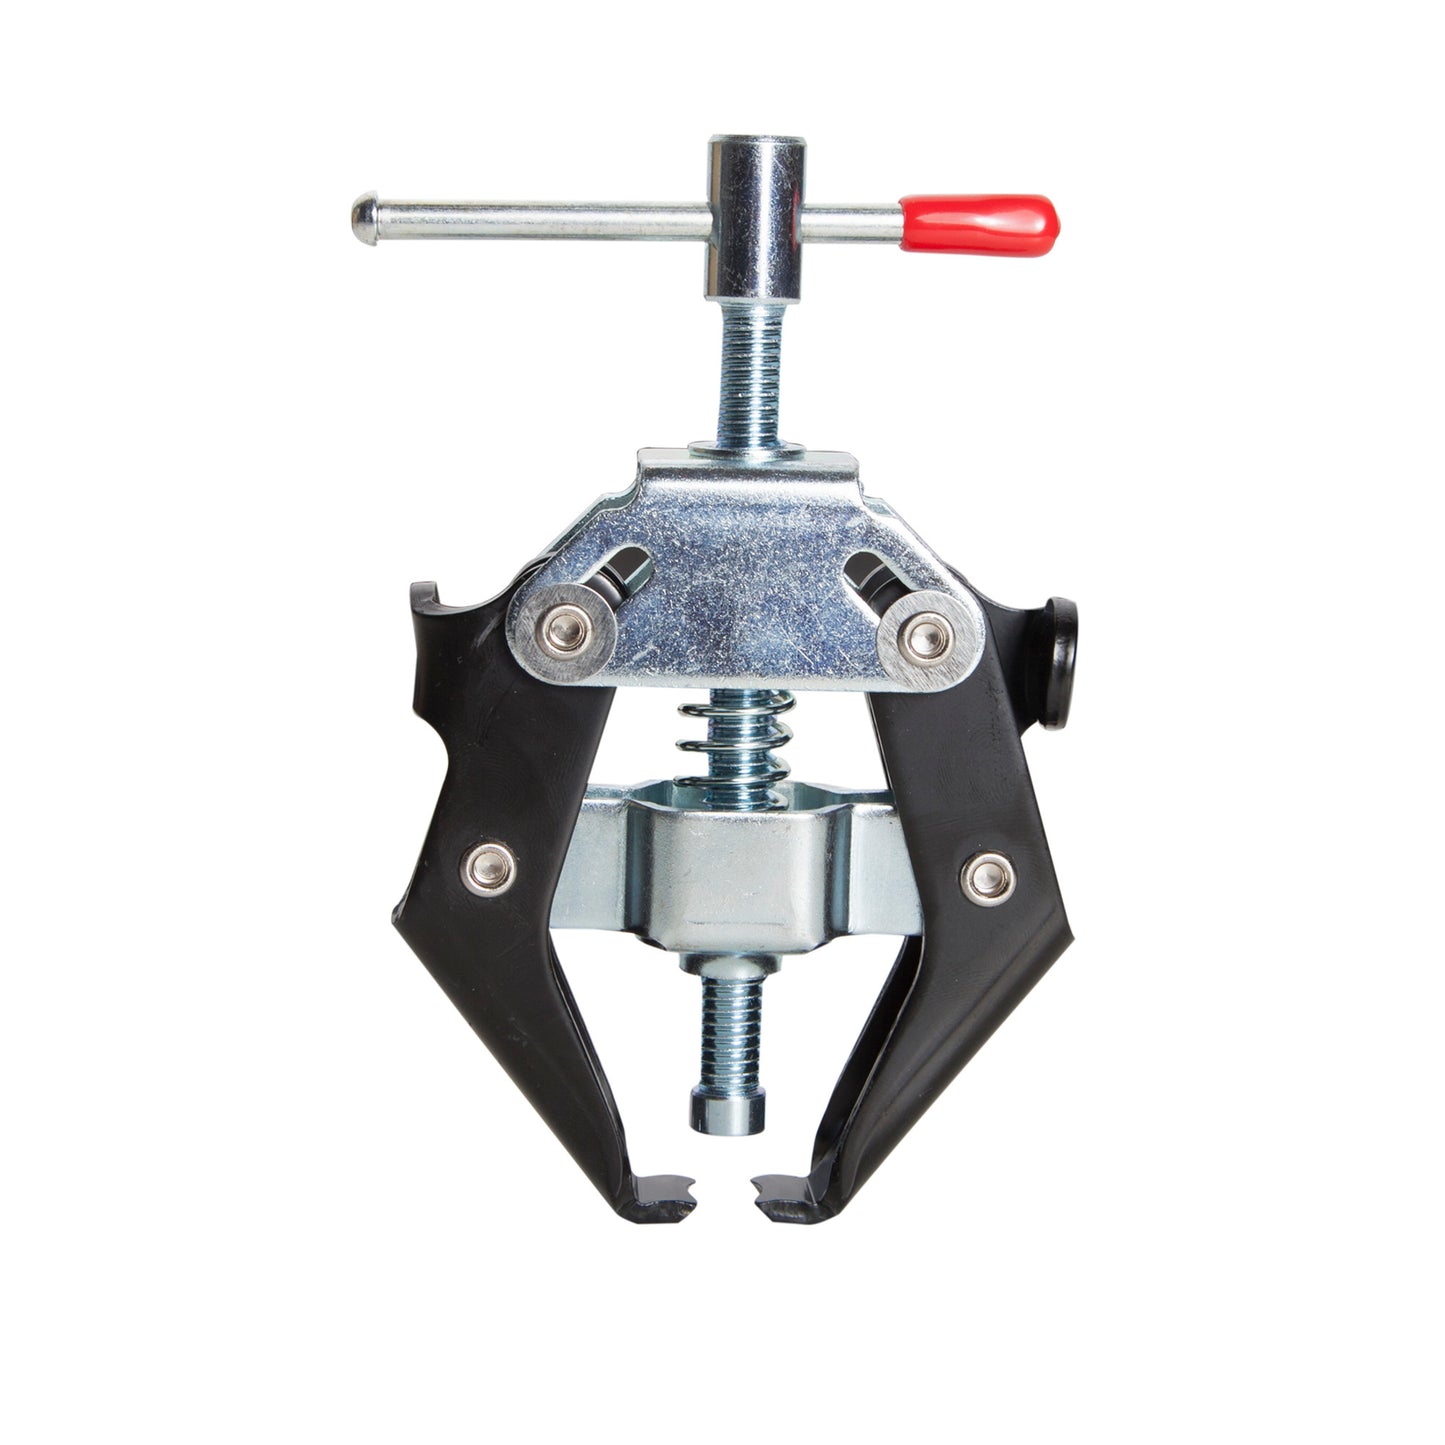 Spring Assisted Battery Terminal Clamp Lifter